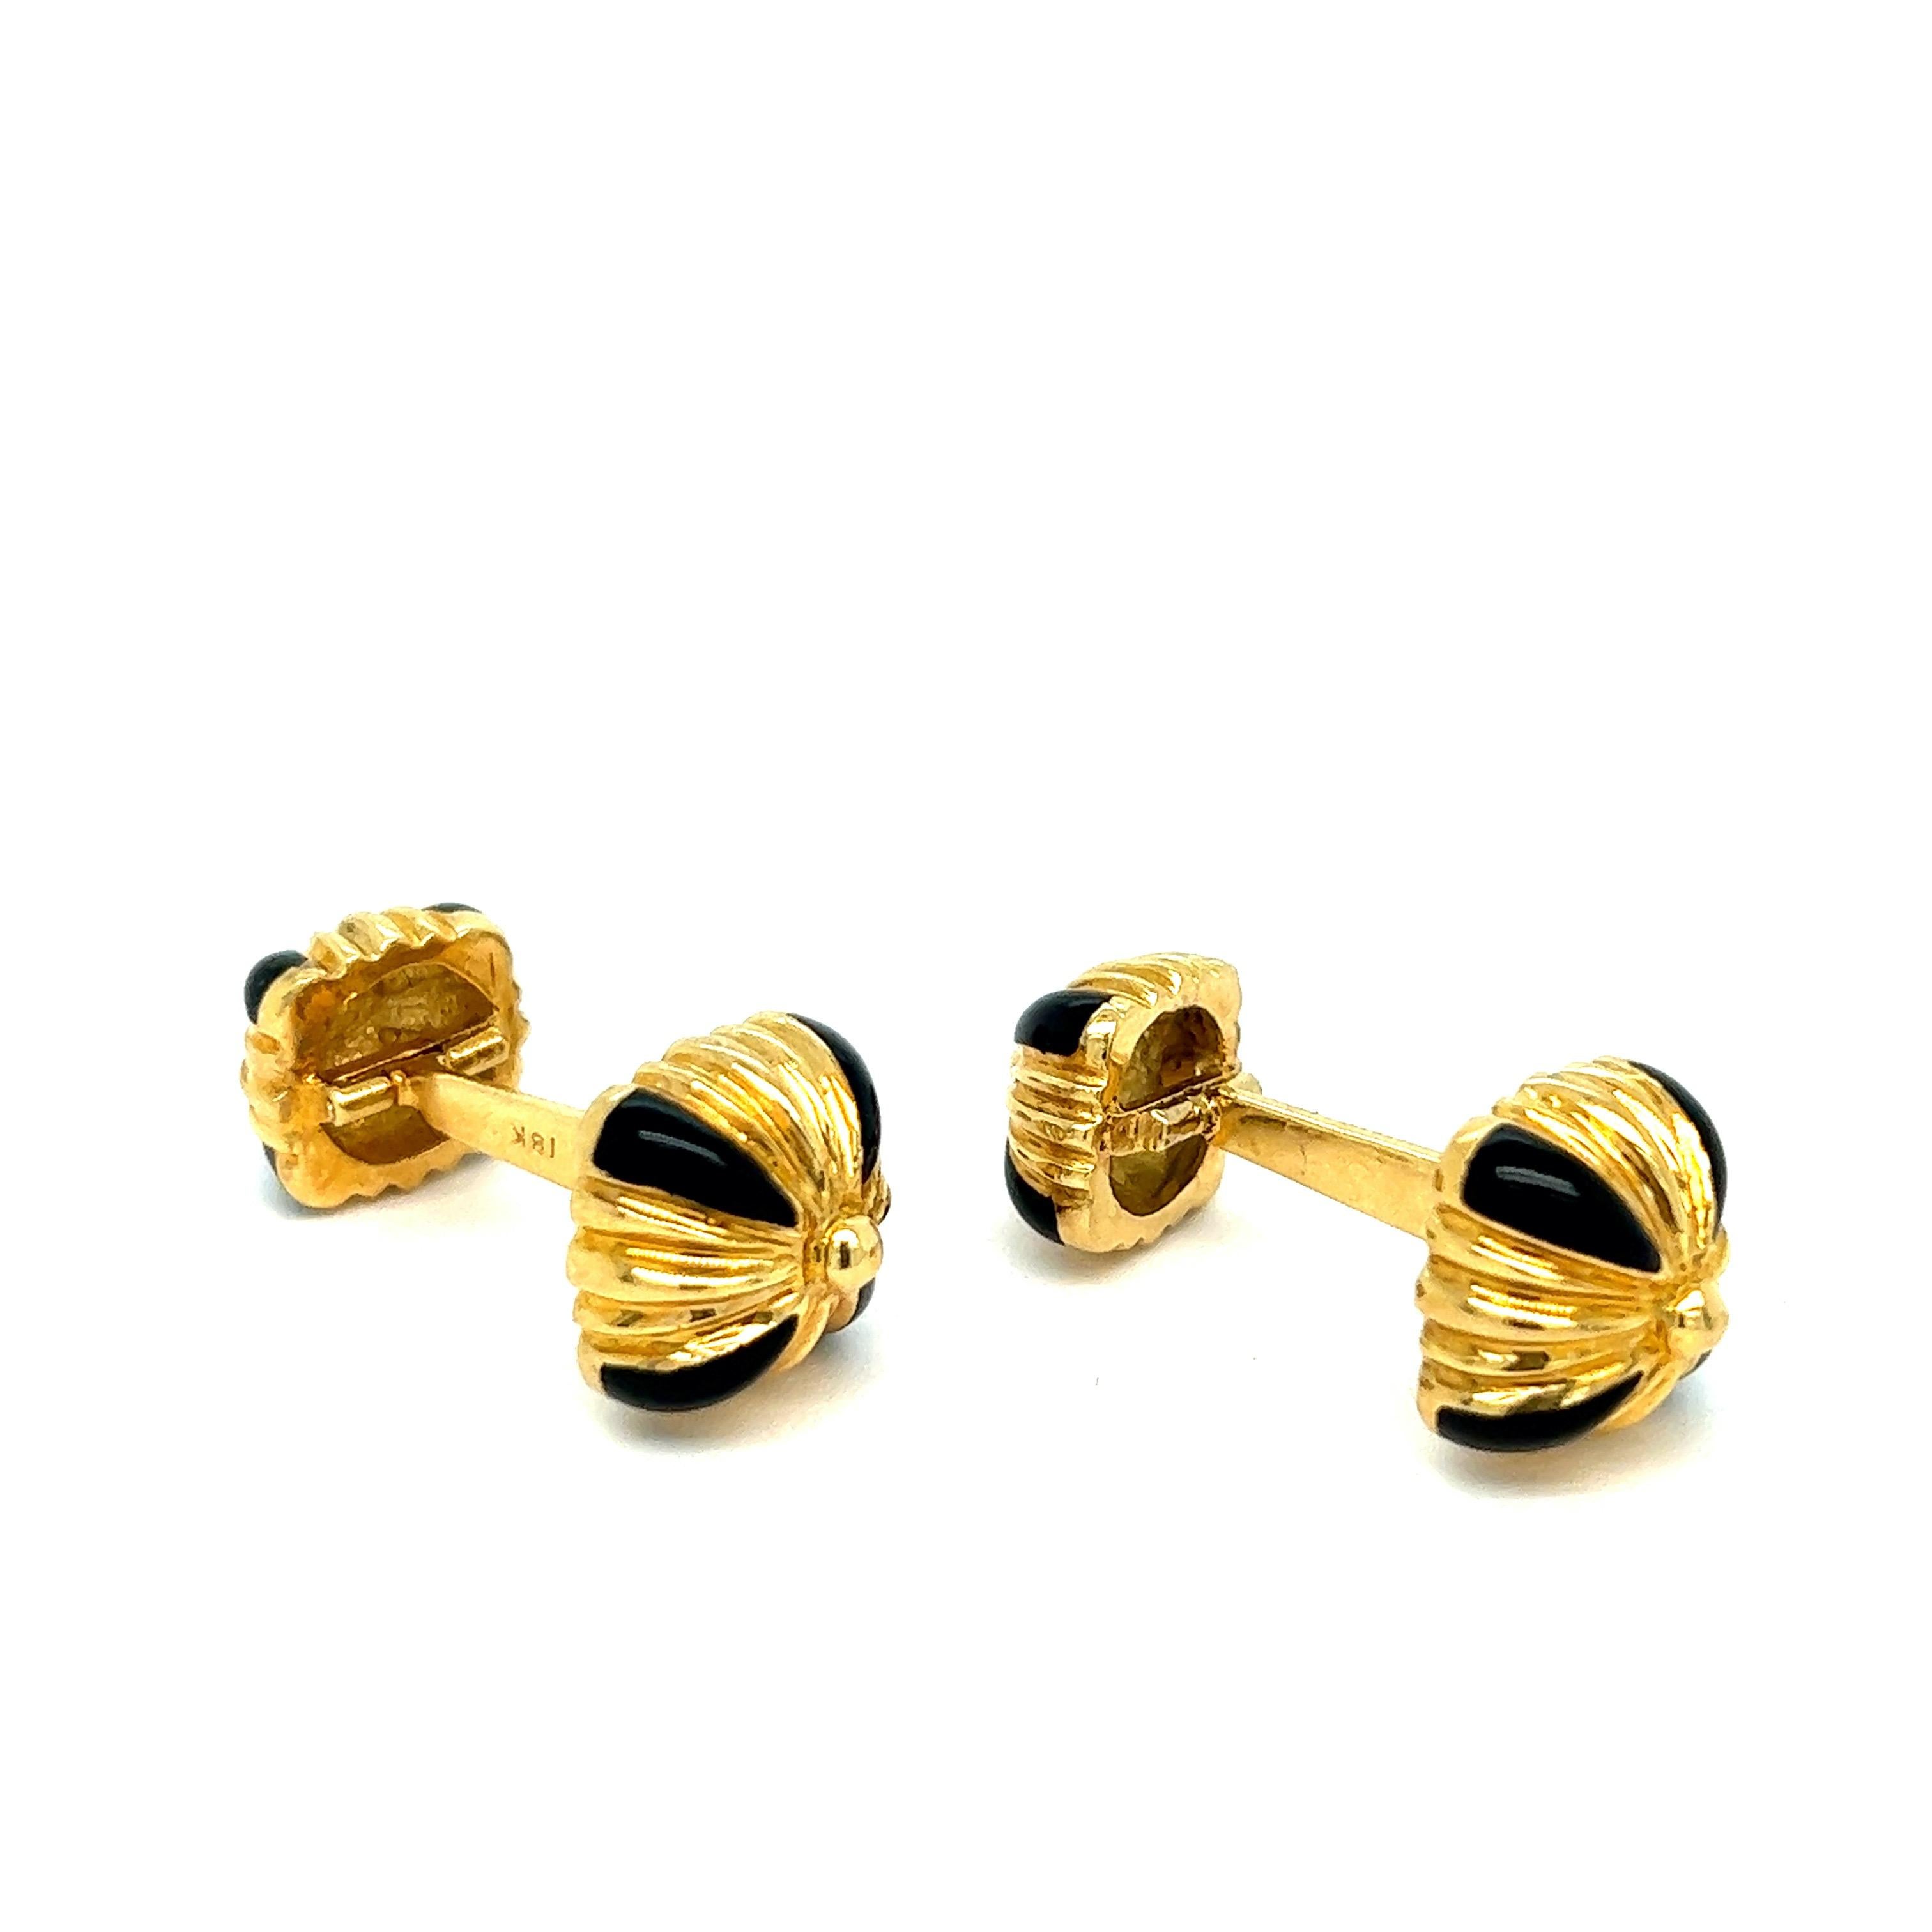 Black Enamel Gold Cufflinks In Excellent Condition For Sale In New York, NY